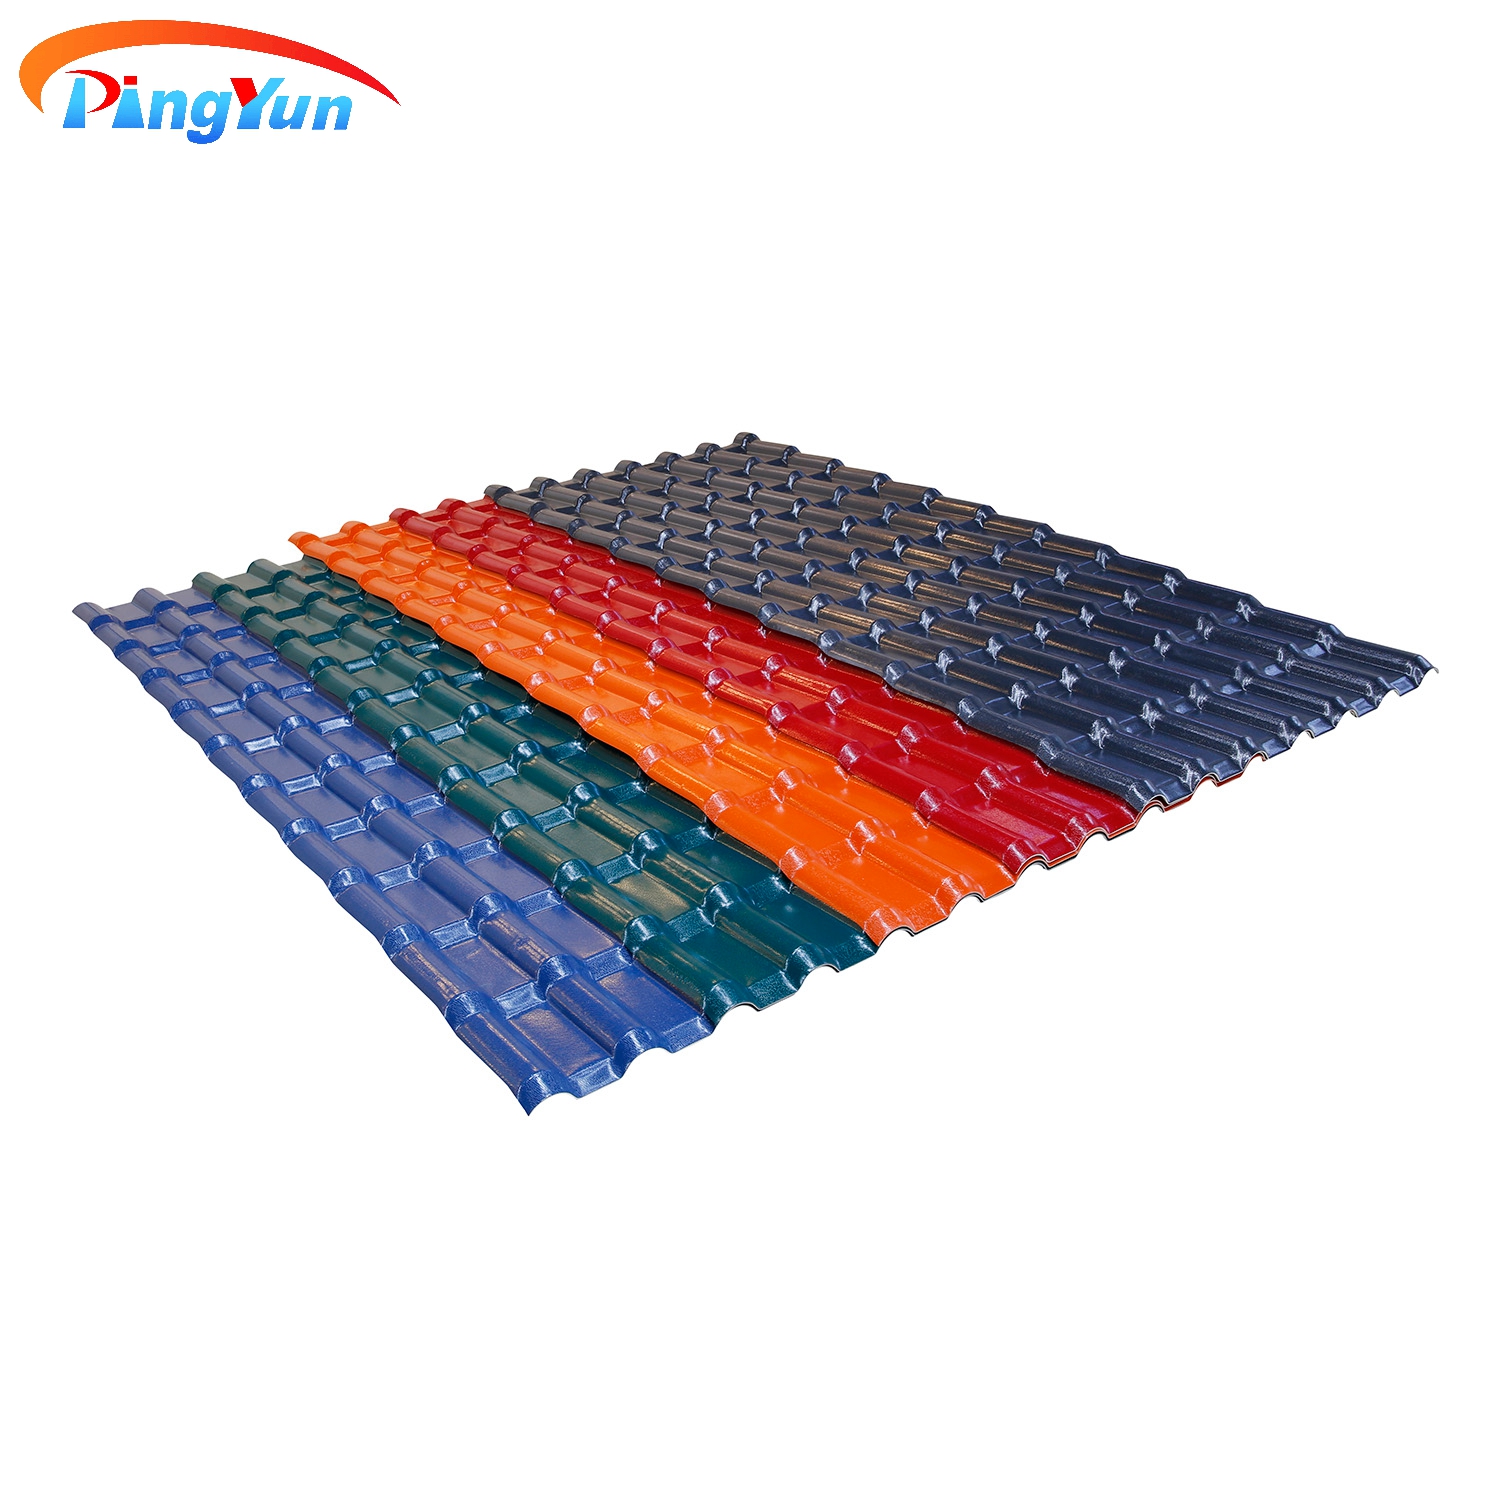 Plastic Roofing Sheets for House Building Materials Corrugated ASA PVC Roof Tile Colombia Spanish Roof Shingles